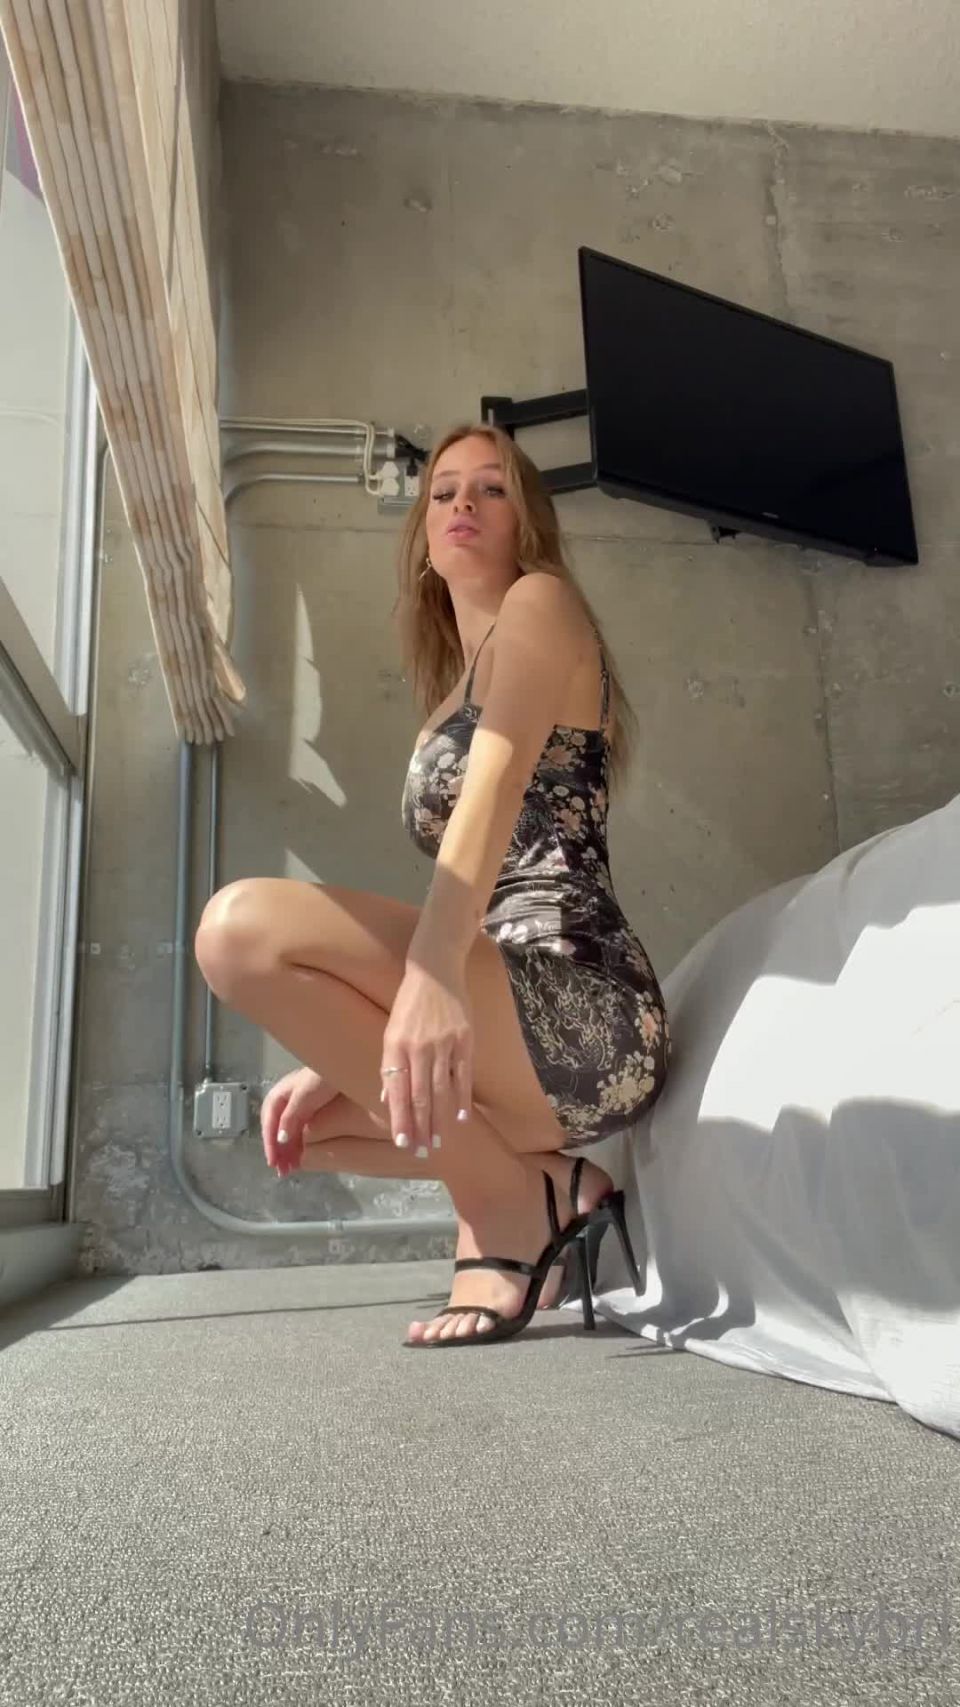 MegaPACK by SoreForDaysSkyBri - [OnlyFans com-Solo] - High Heels and Anal Play